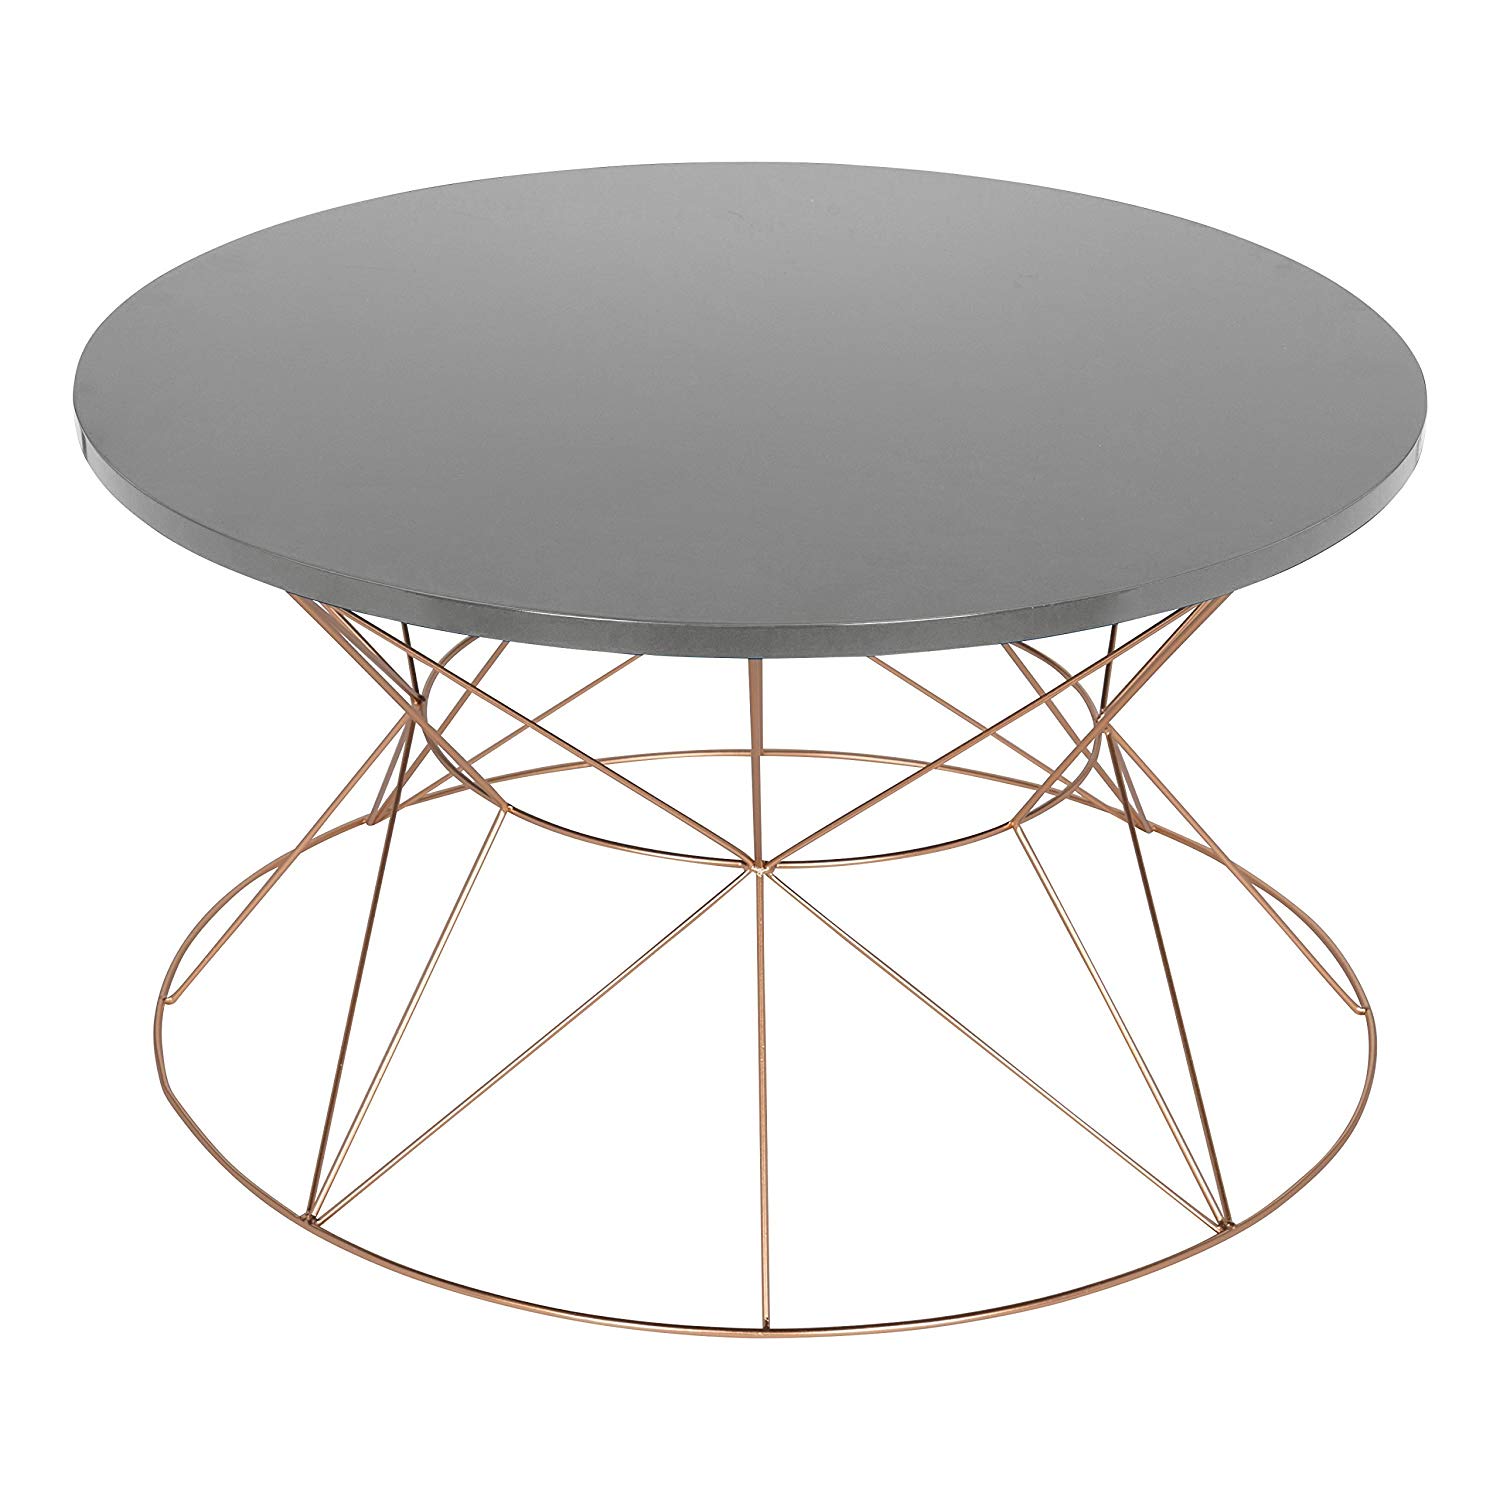 kate and laurel mendel round metal coffee table gray avery glass top accent with rose gold base kitchen dining wine rack target windham side farm build wood furniture foam